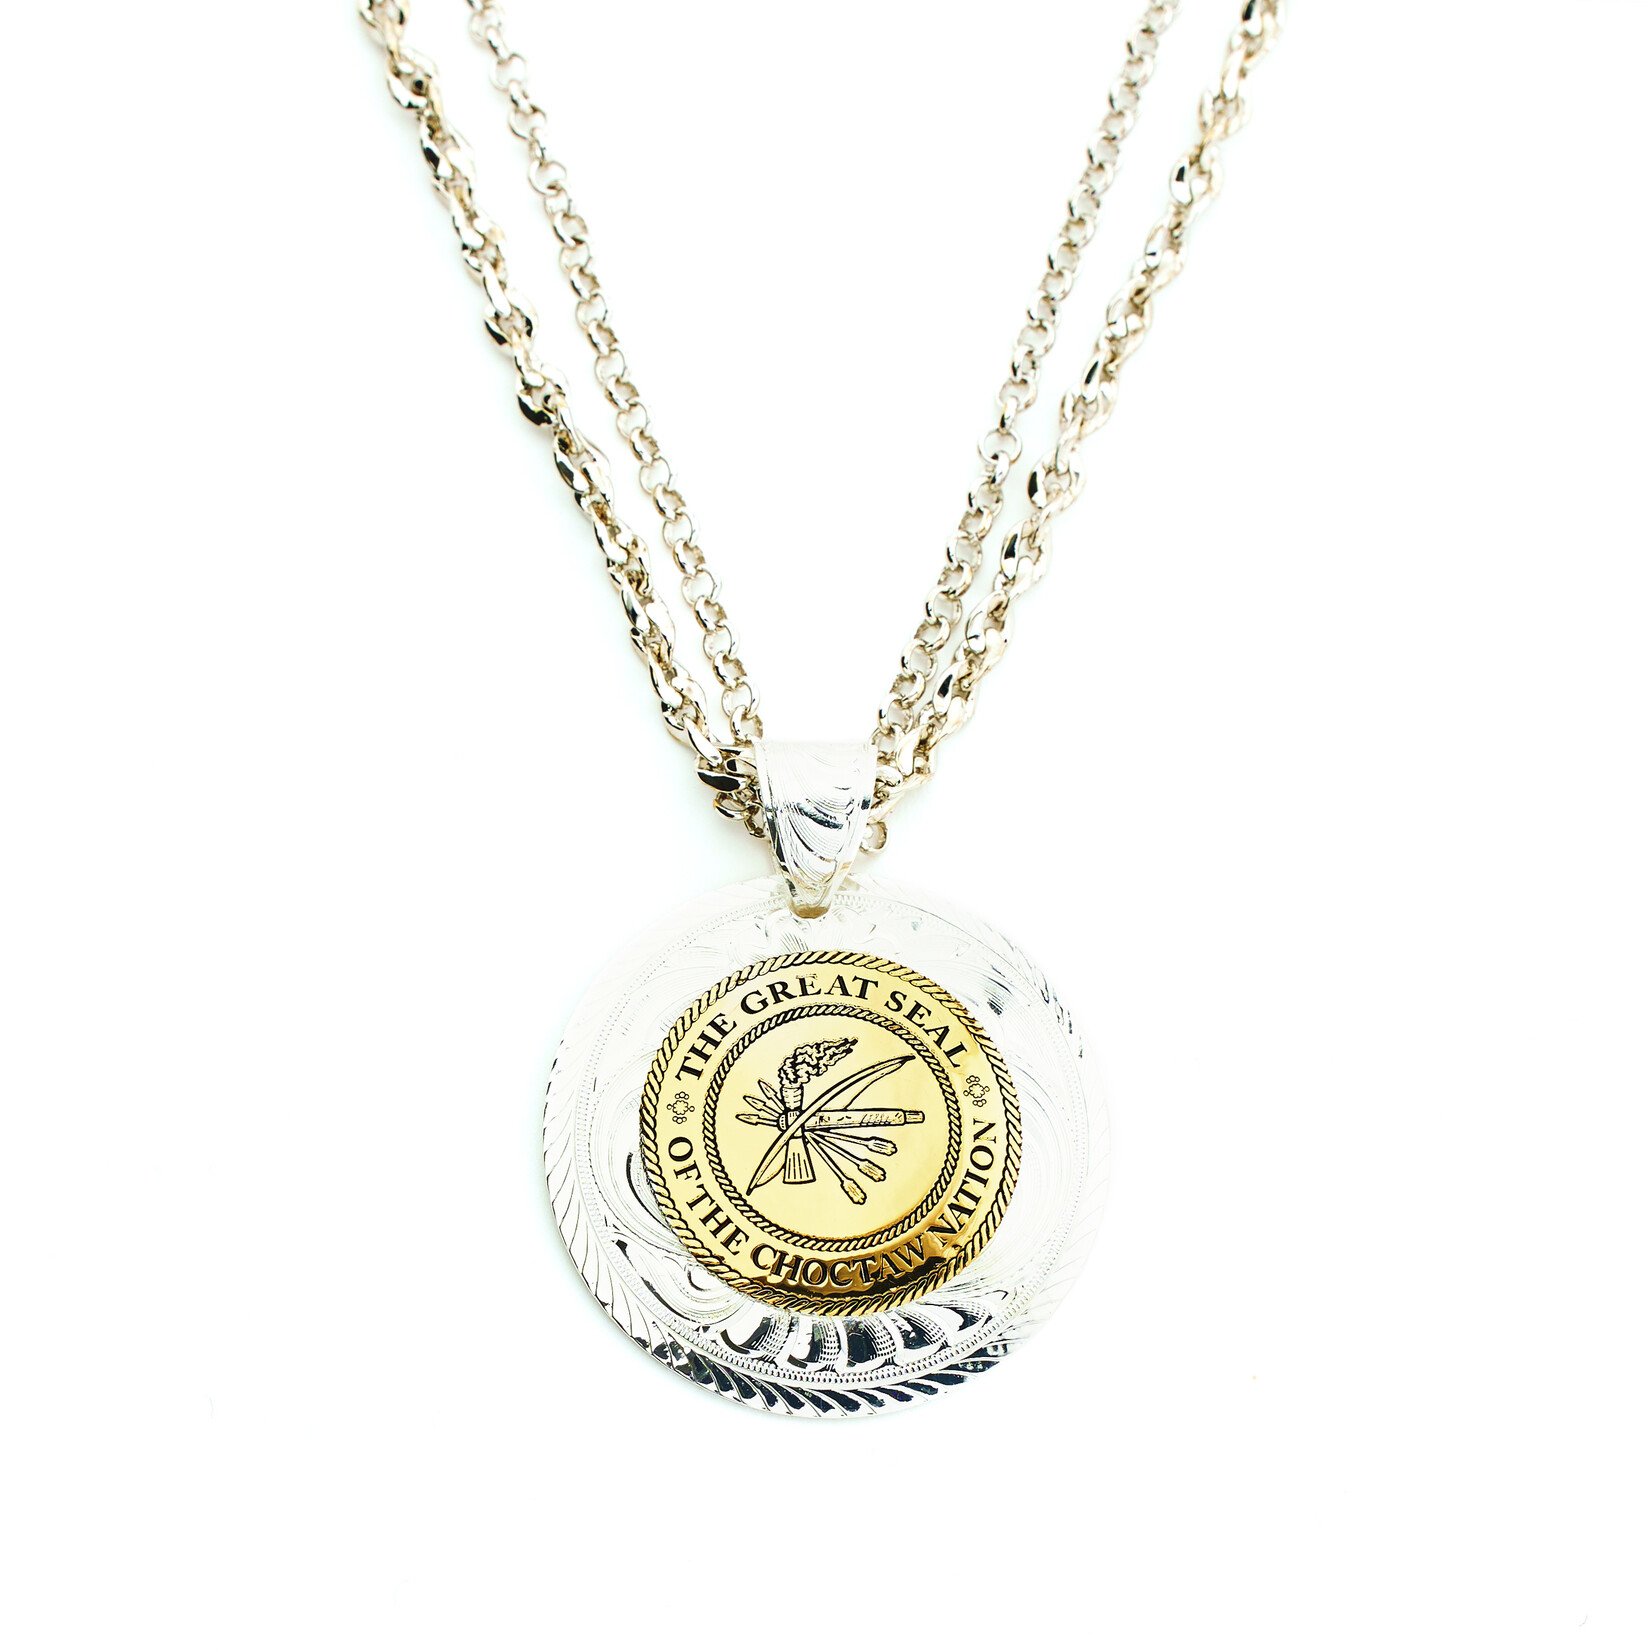 Great Seal pendent by Montana Silversmiths